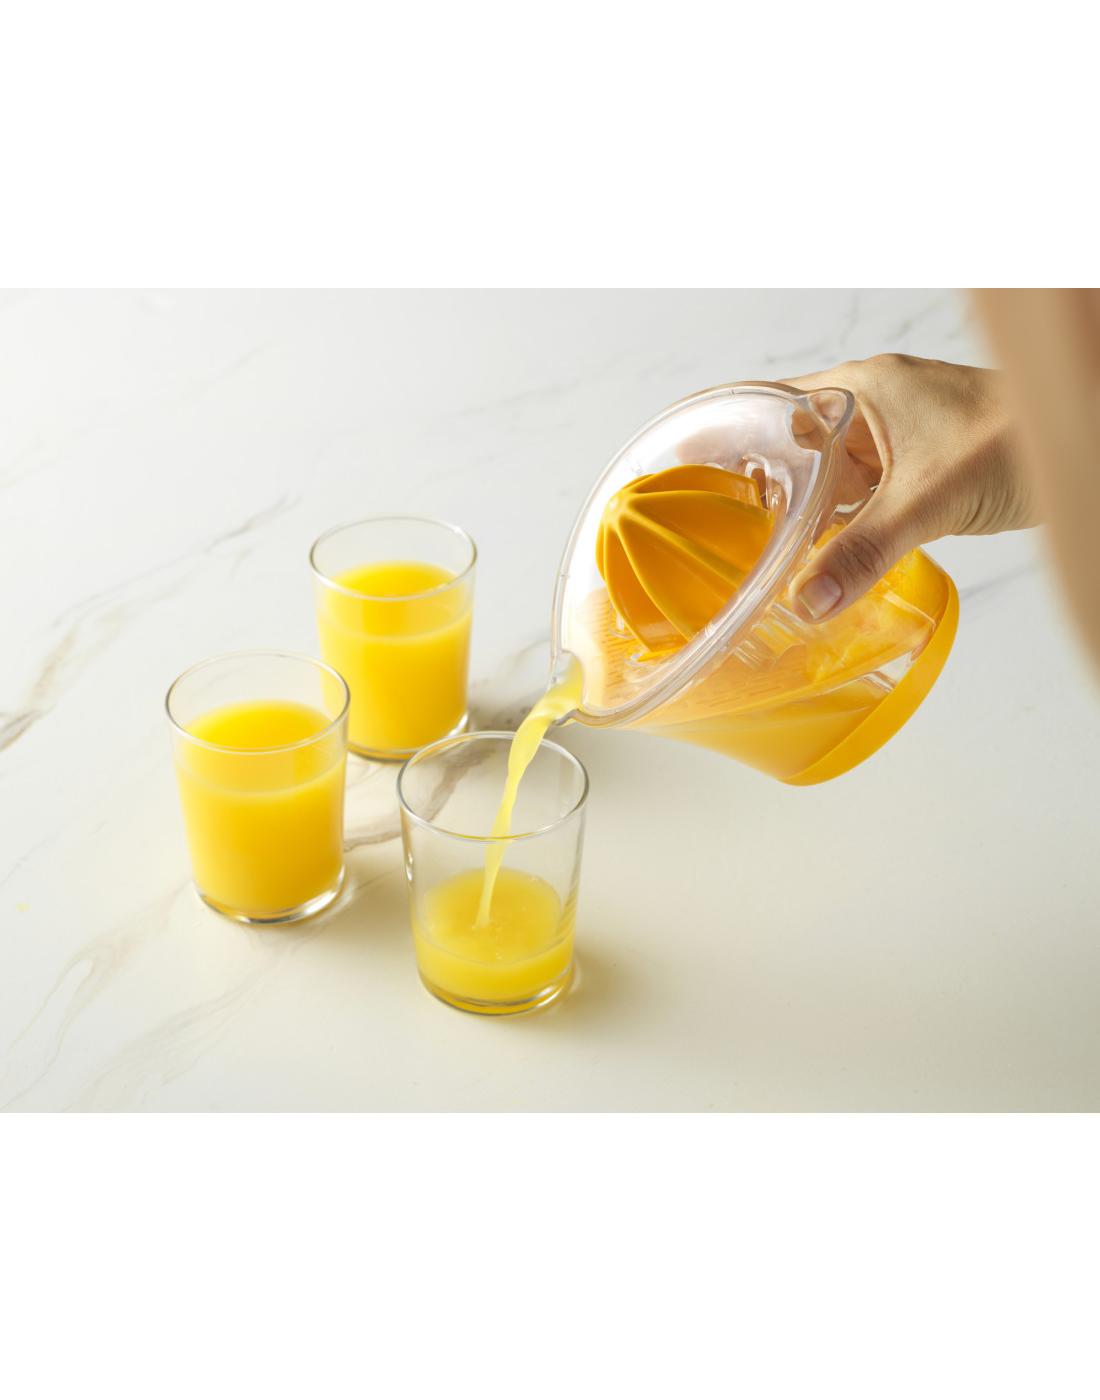 GoodCook Touch 2-in-1 Citrus Juicer; image 3 of 5